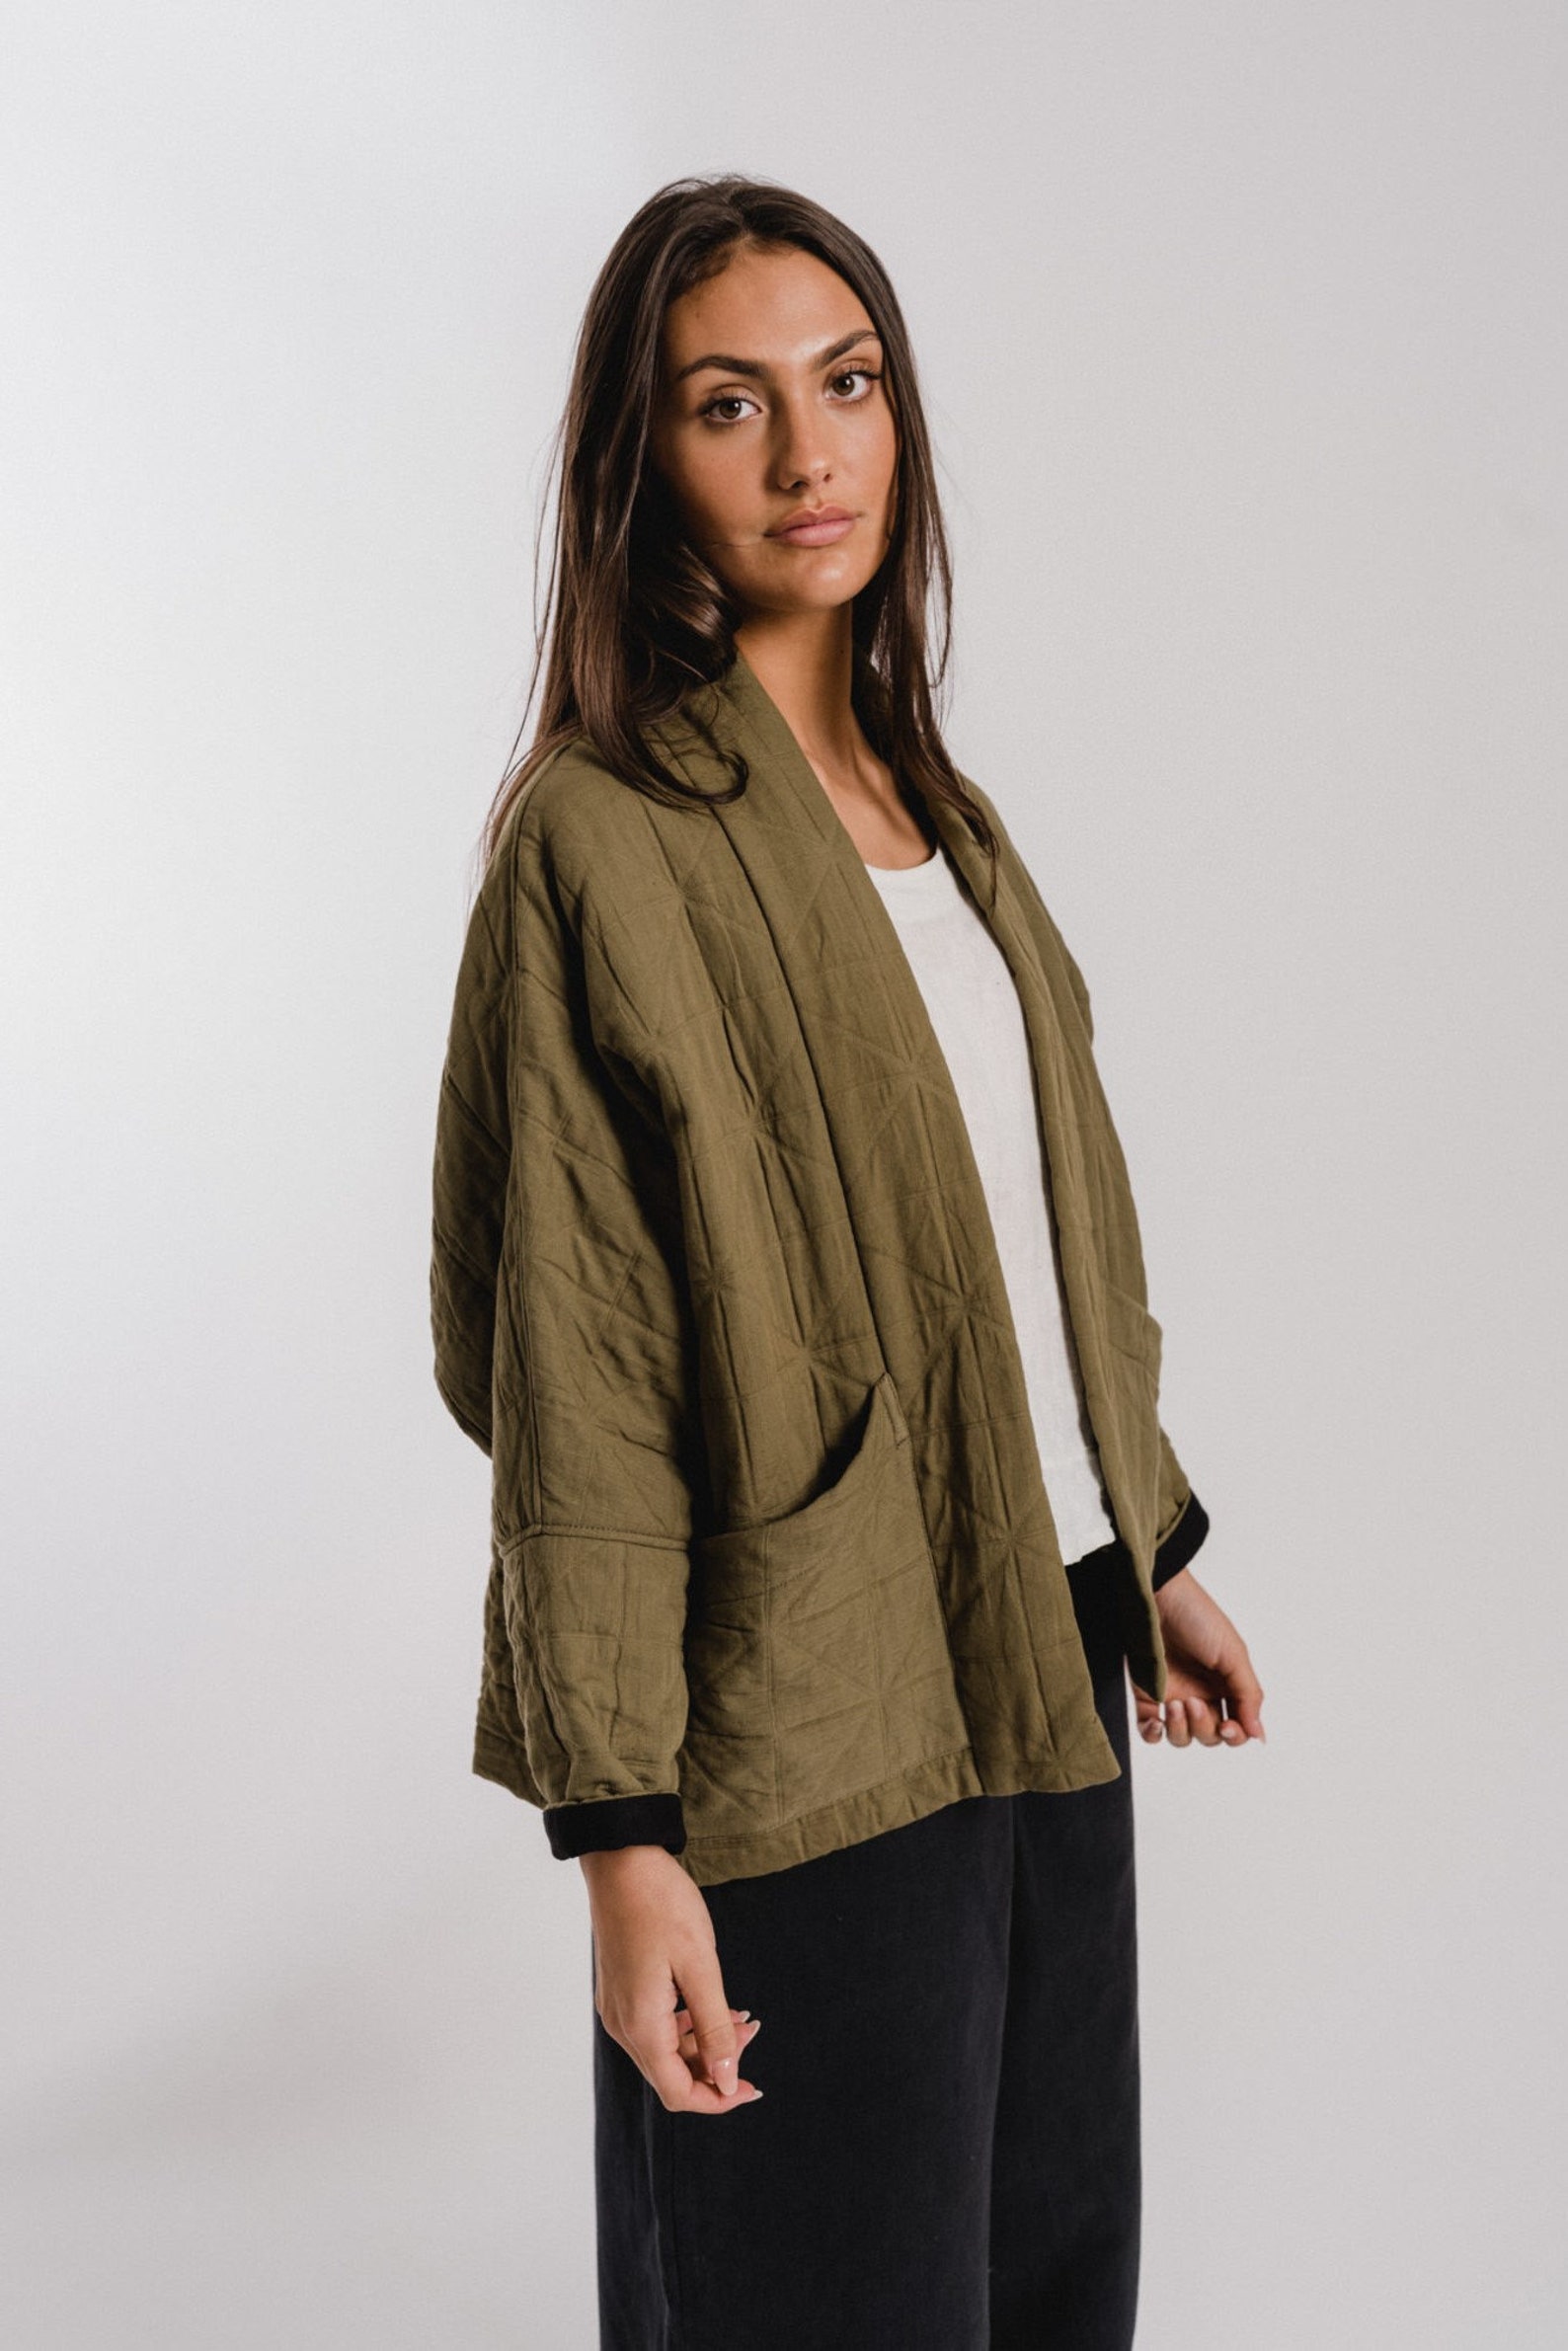 Short Quilted Jacket / Khaki Green / Batwing / 100% Cotton / - Etsy